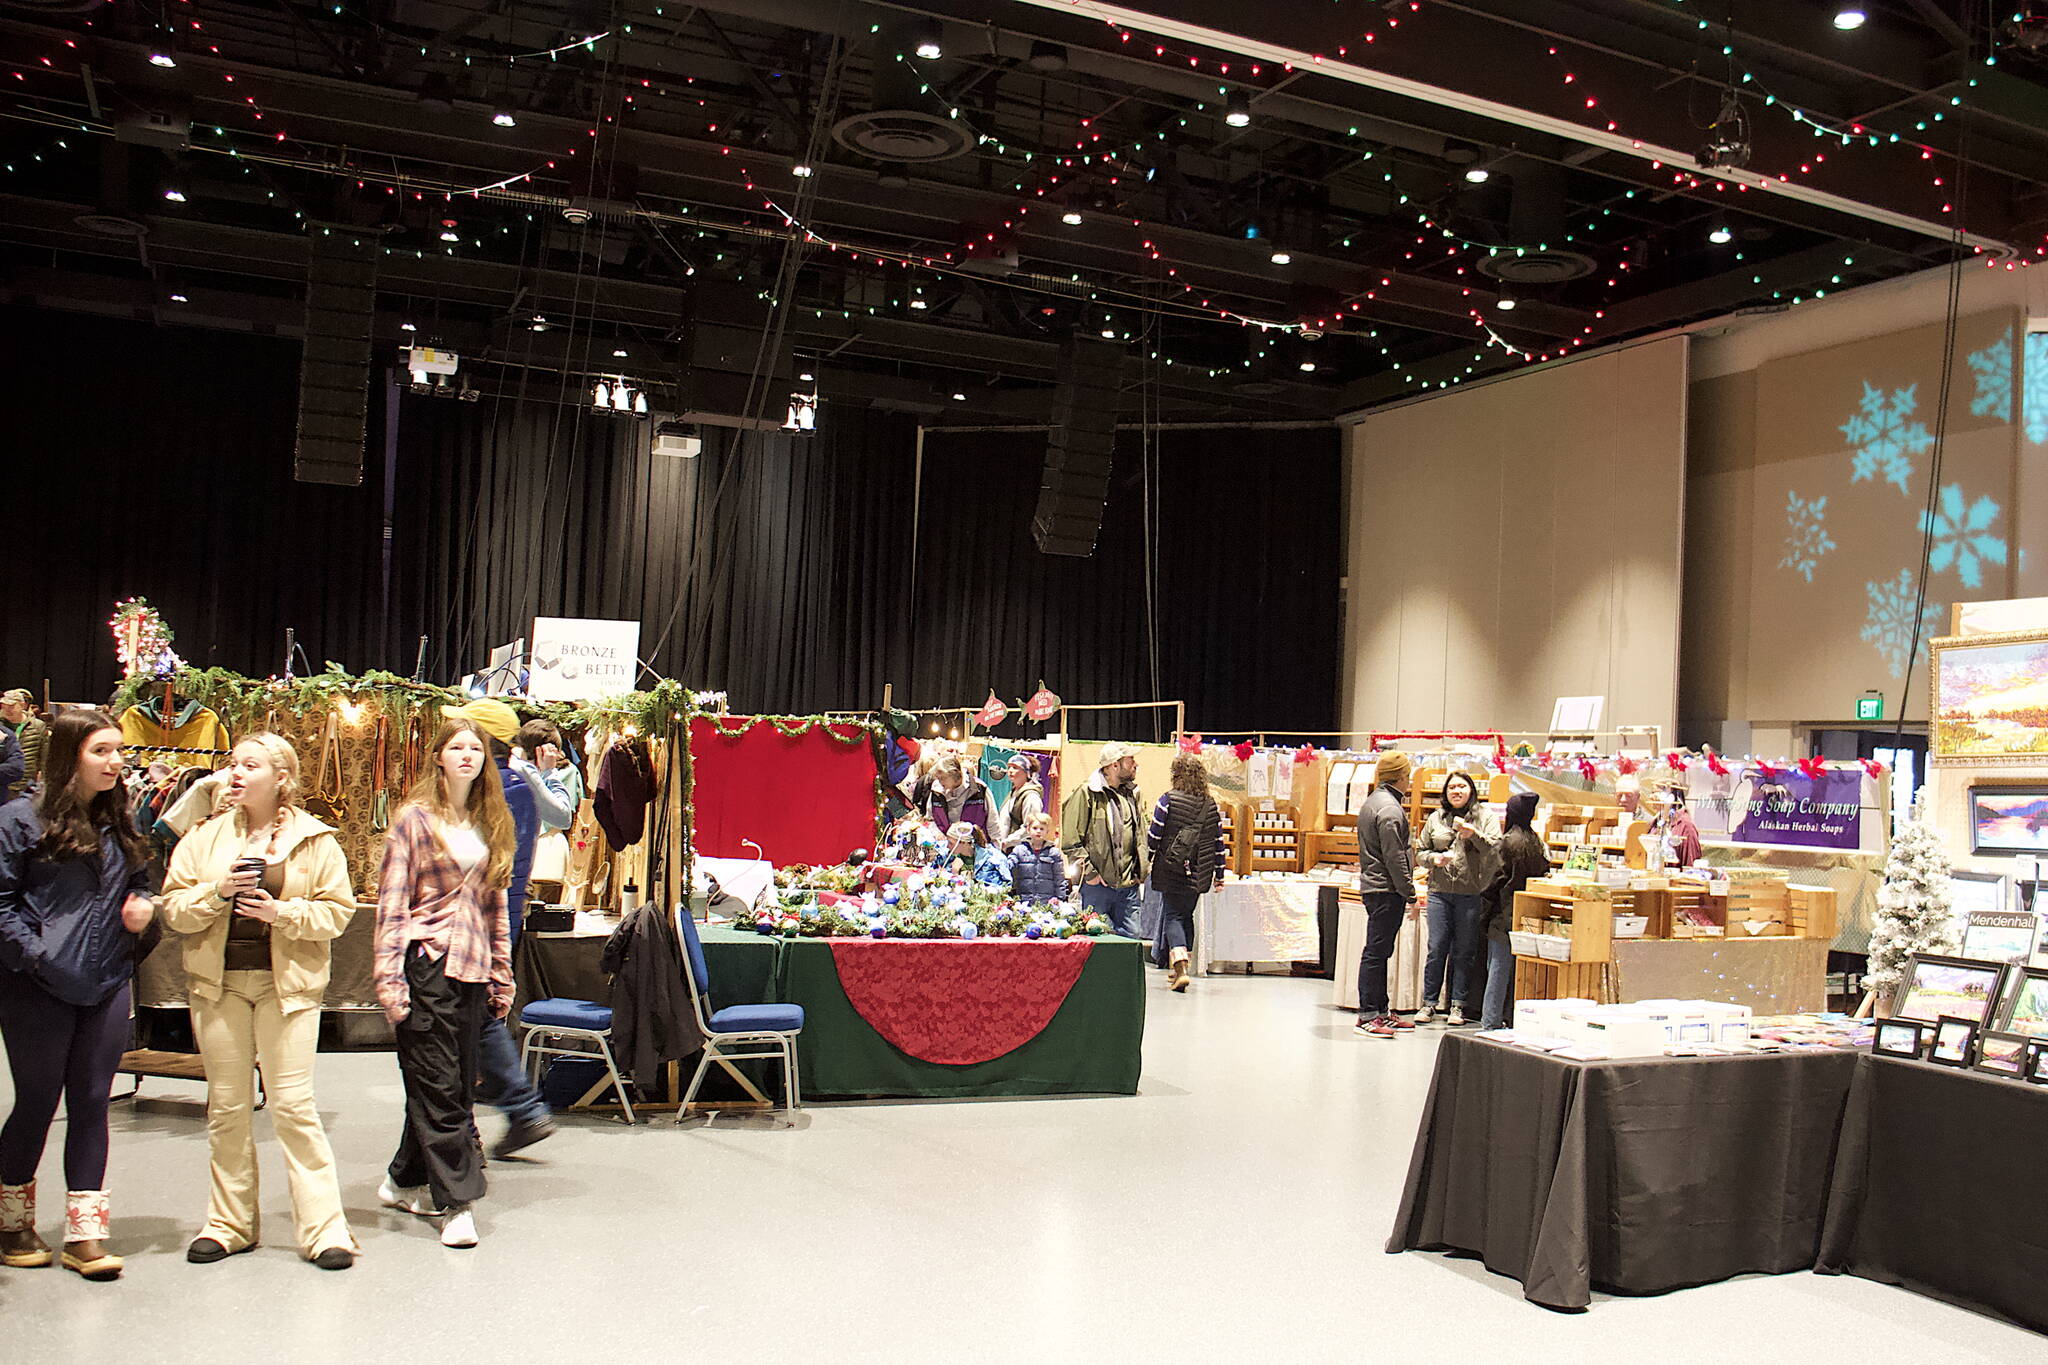 The main room of Centennial Hall is filled with vendors and shoppers during the opening day of the 41st annual Juneau Public Market on Friday. (Mark Sabbatini / Juneau Empire)